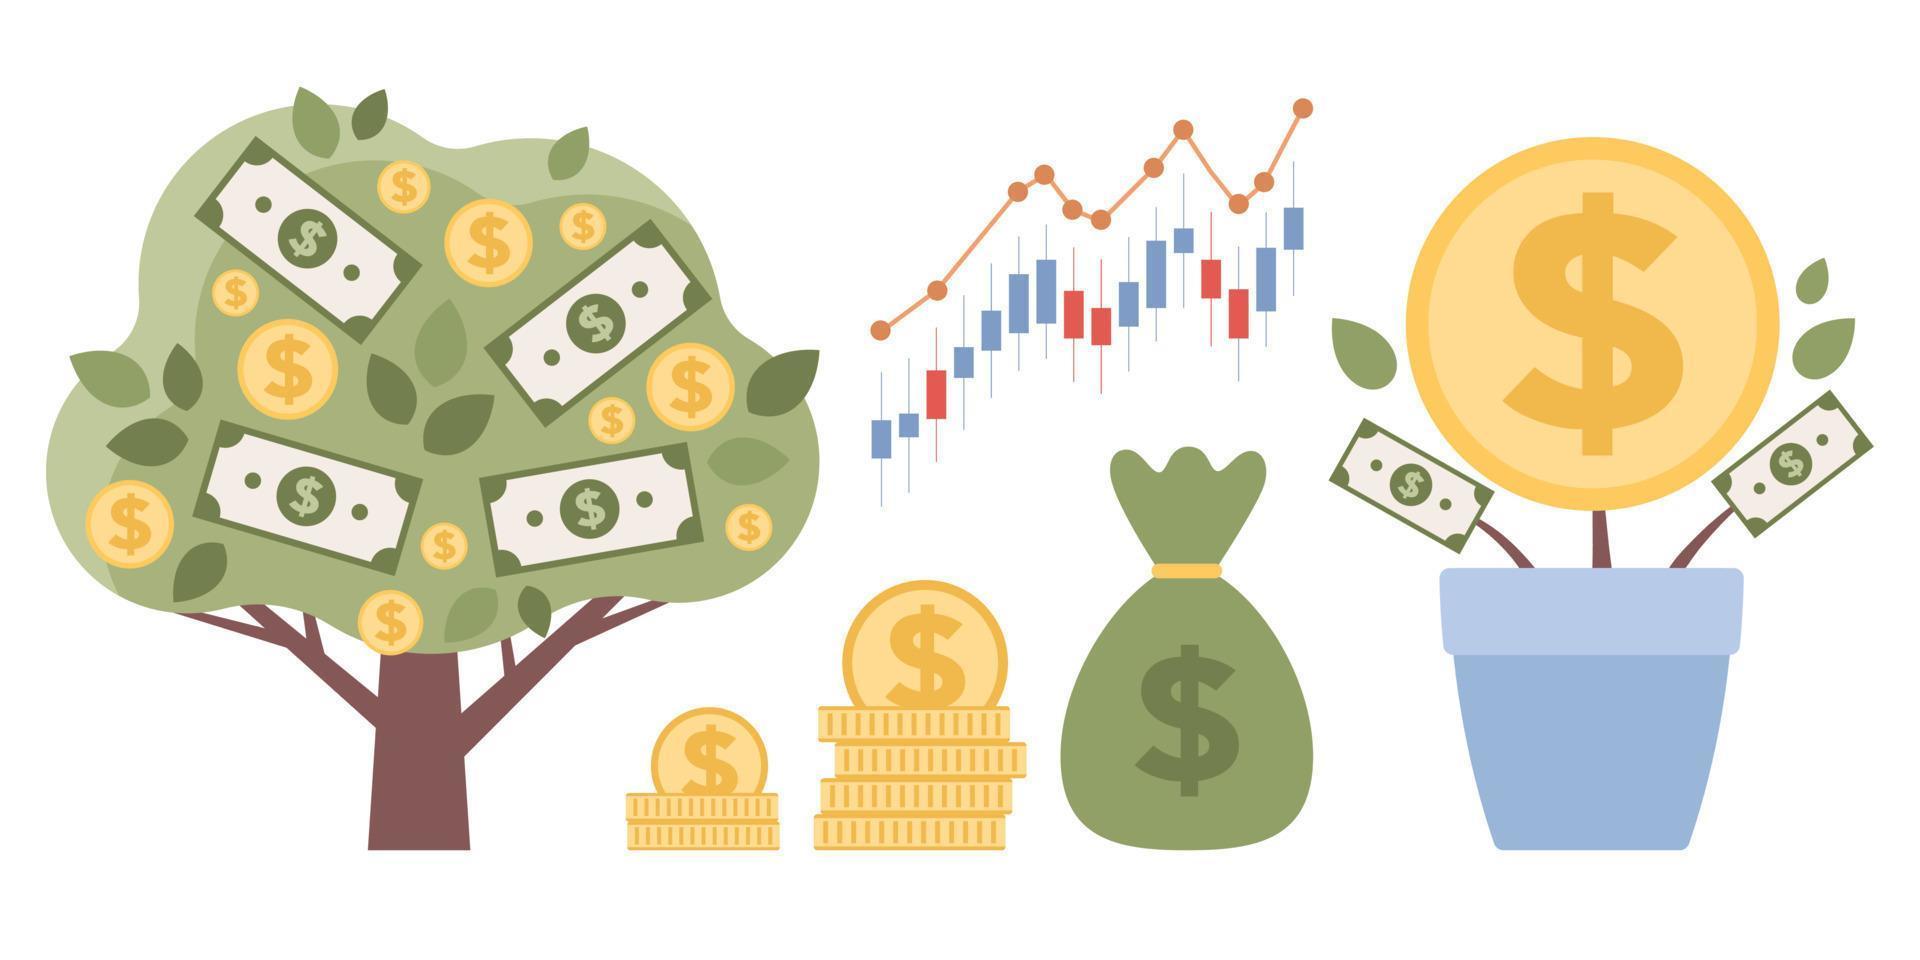 Investment signs. Financial icon set. Investing money in stock market. Business concept. Financial management, money savings and deposit growth concept. Money tree. Vector flat illustration